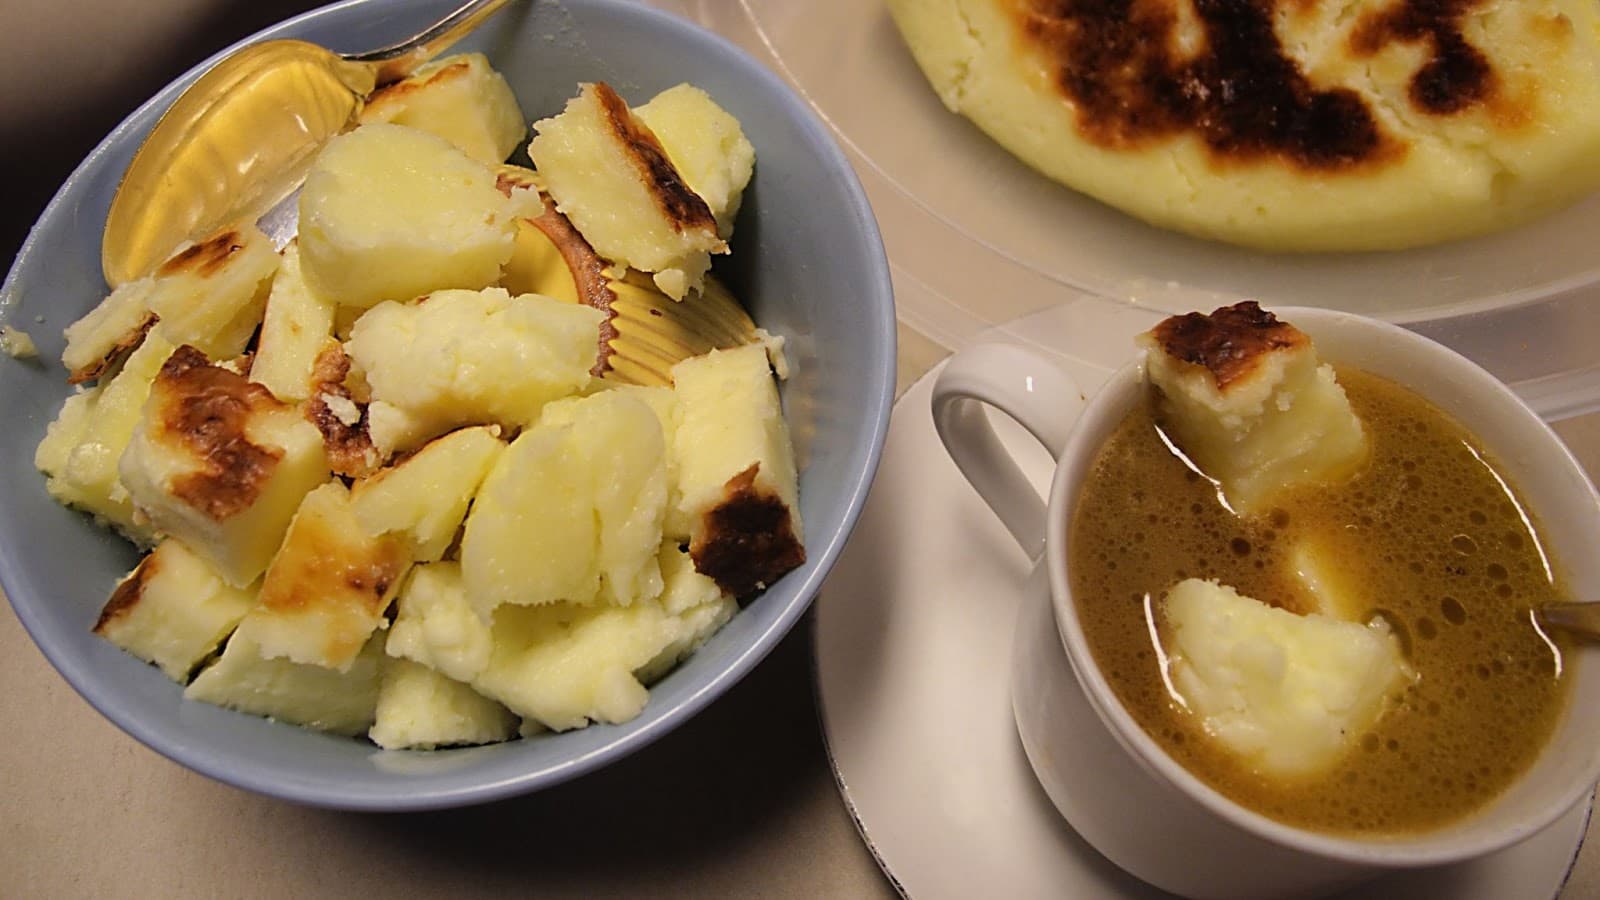 Kaffeost or cheese coffee can be found throughout Scandinavia